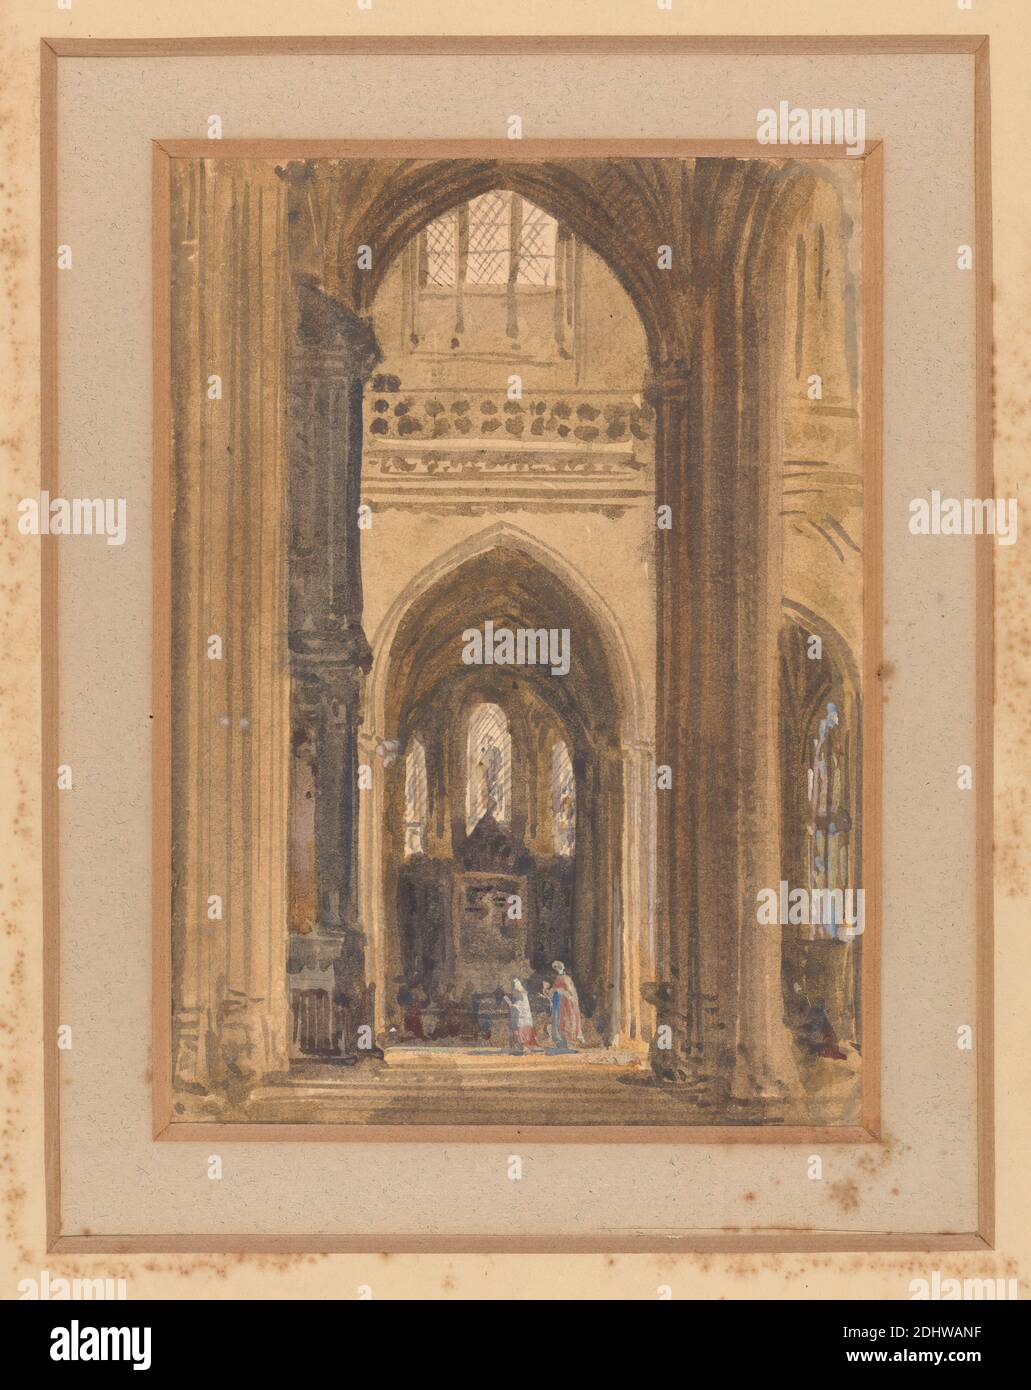 Interior of a Gothic Church, Augustus Welby Northmore Pugin, 1812–1852, British, Augustus Charles Pugin, 1762–1832, French, undated, Watercolor on moderately thick, moderately textured, cream wove paper, Sheet: 5 1/4 × 3 3/4 inches (13.3 × 9.5 cm), architectural subject, chapels, church, columns (architectural elements), Gothic (Medieval), interior, people, windows, worship Stock Photo